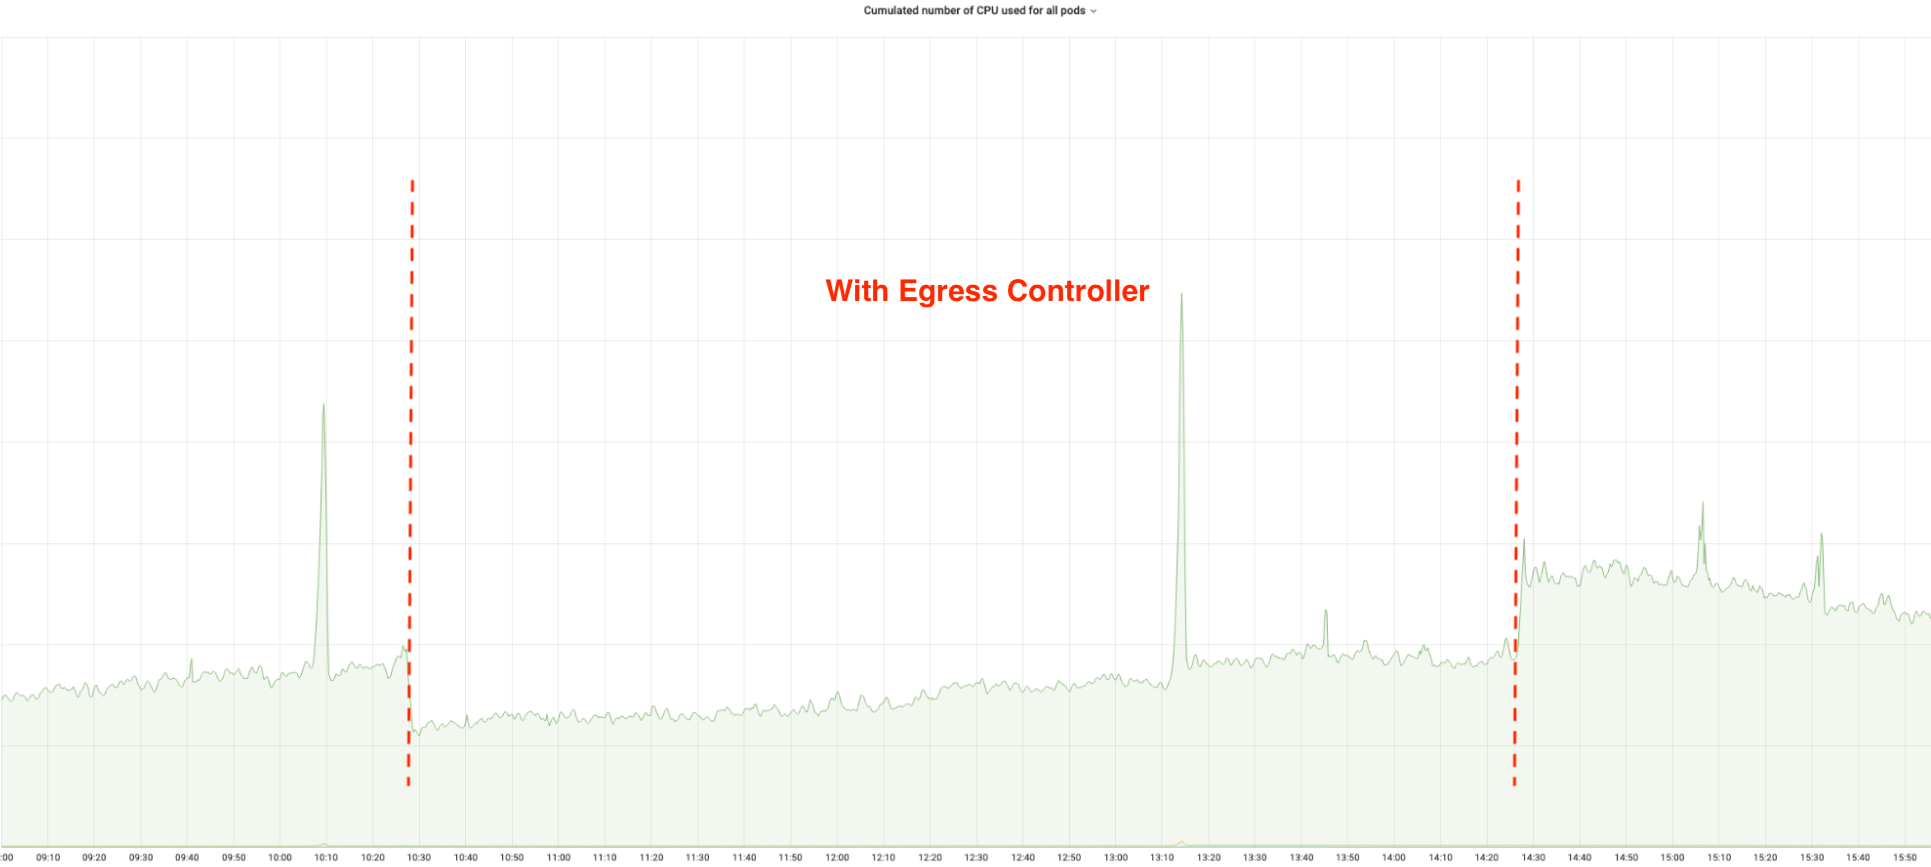 CPU consumption of an app configured to use Egress Controller for DynamoDB requests